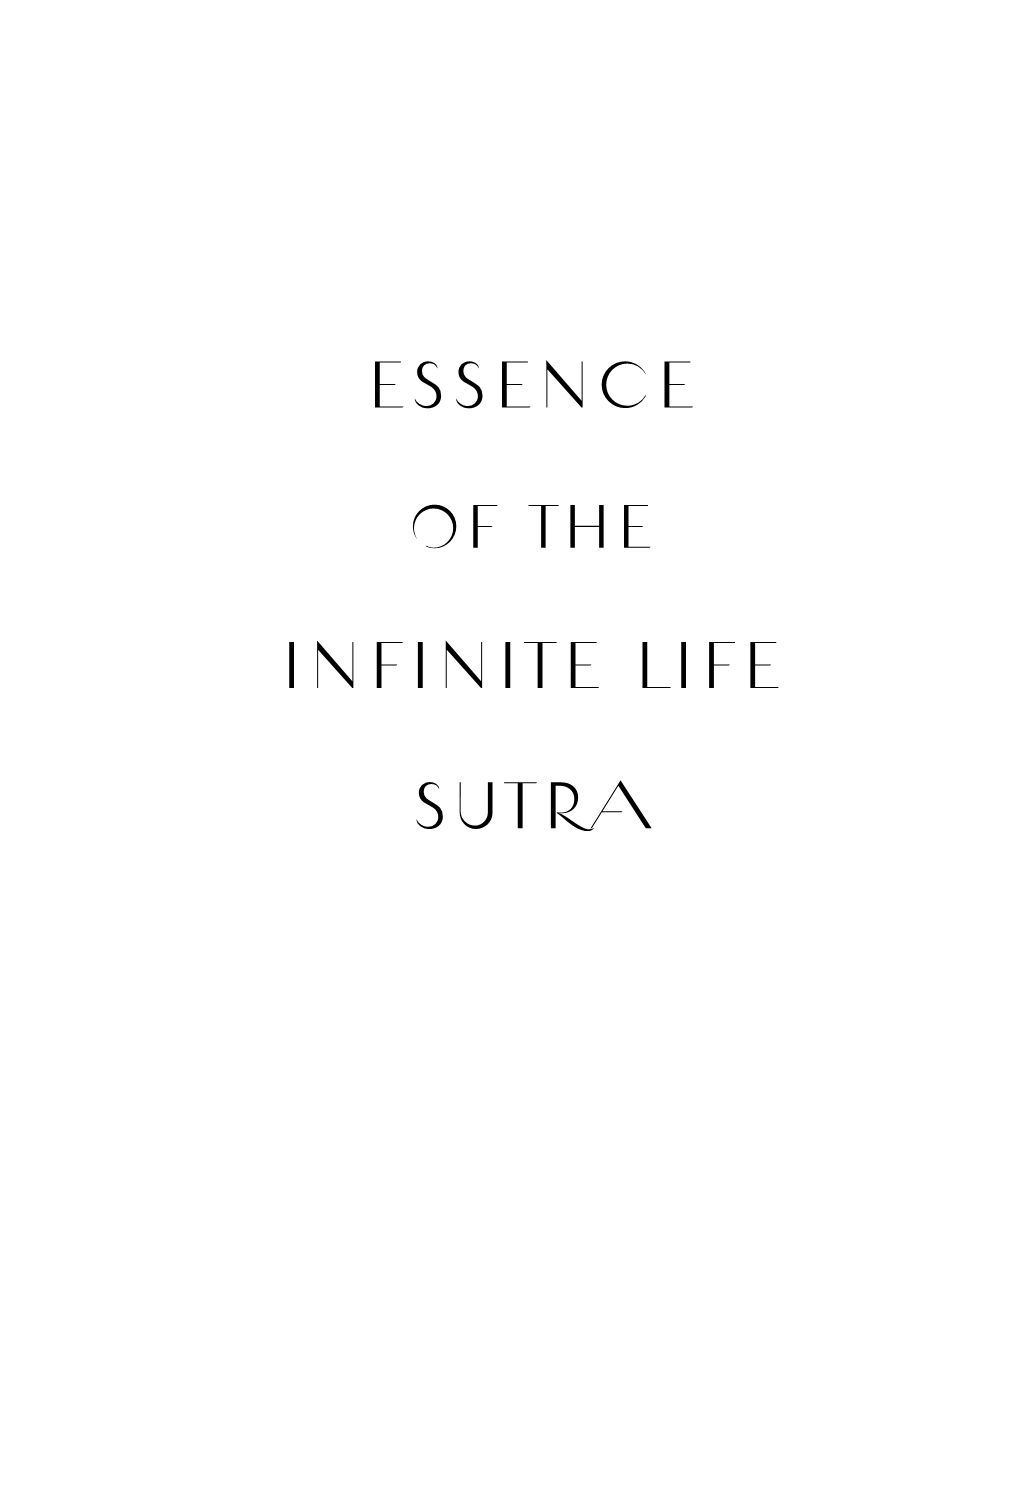 Essence of the Infinite Life Sutra